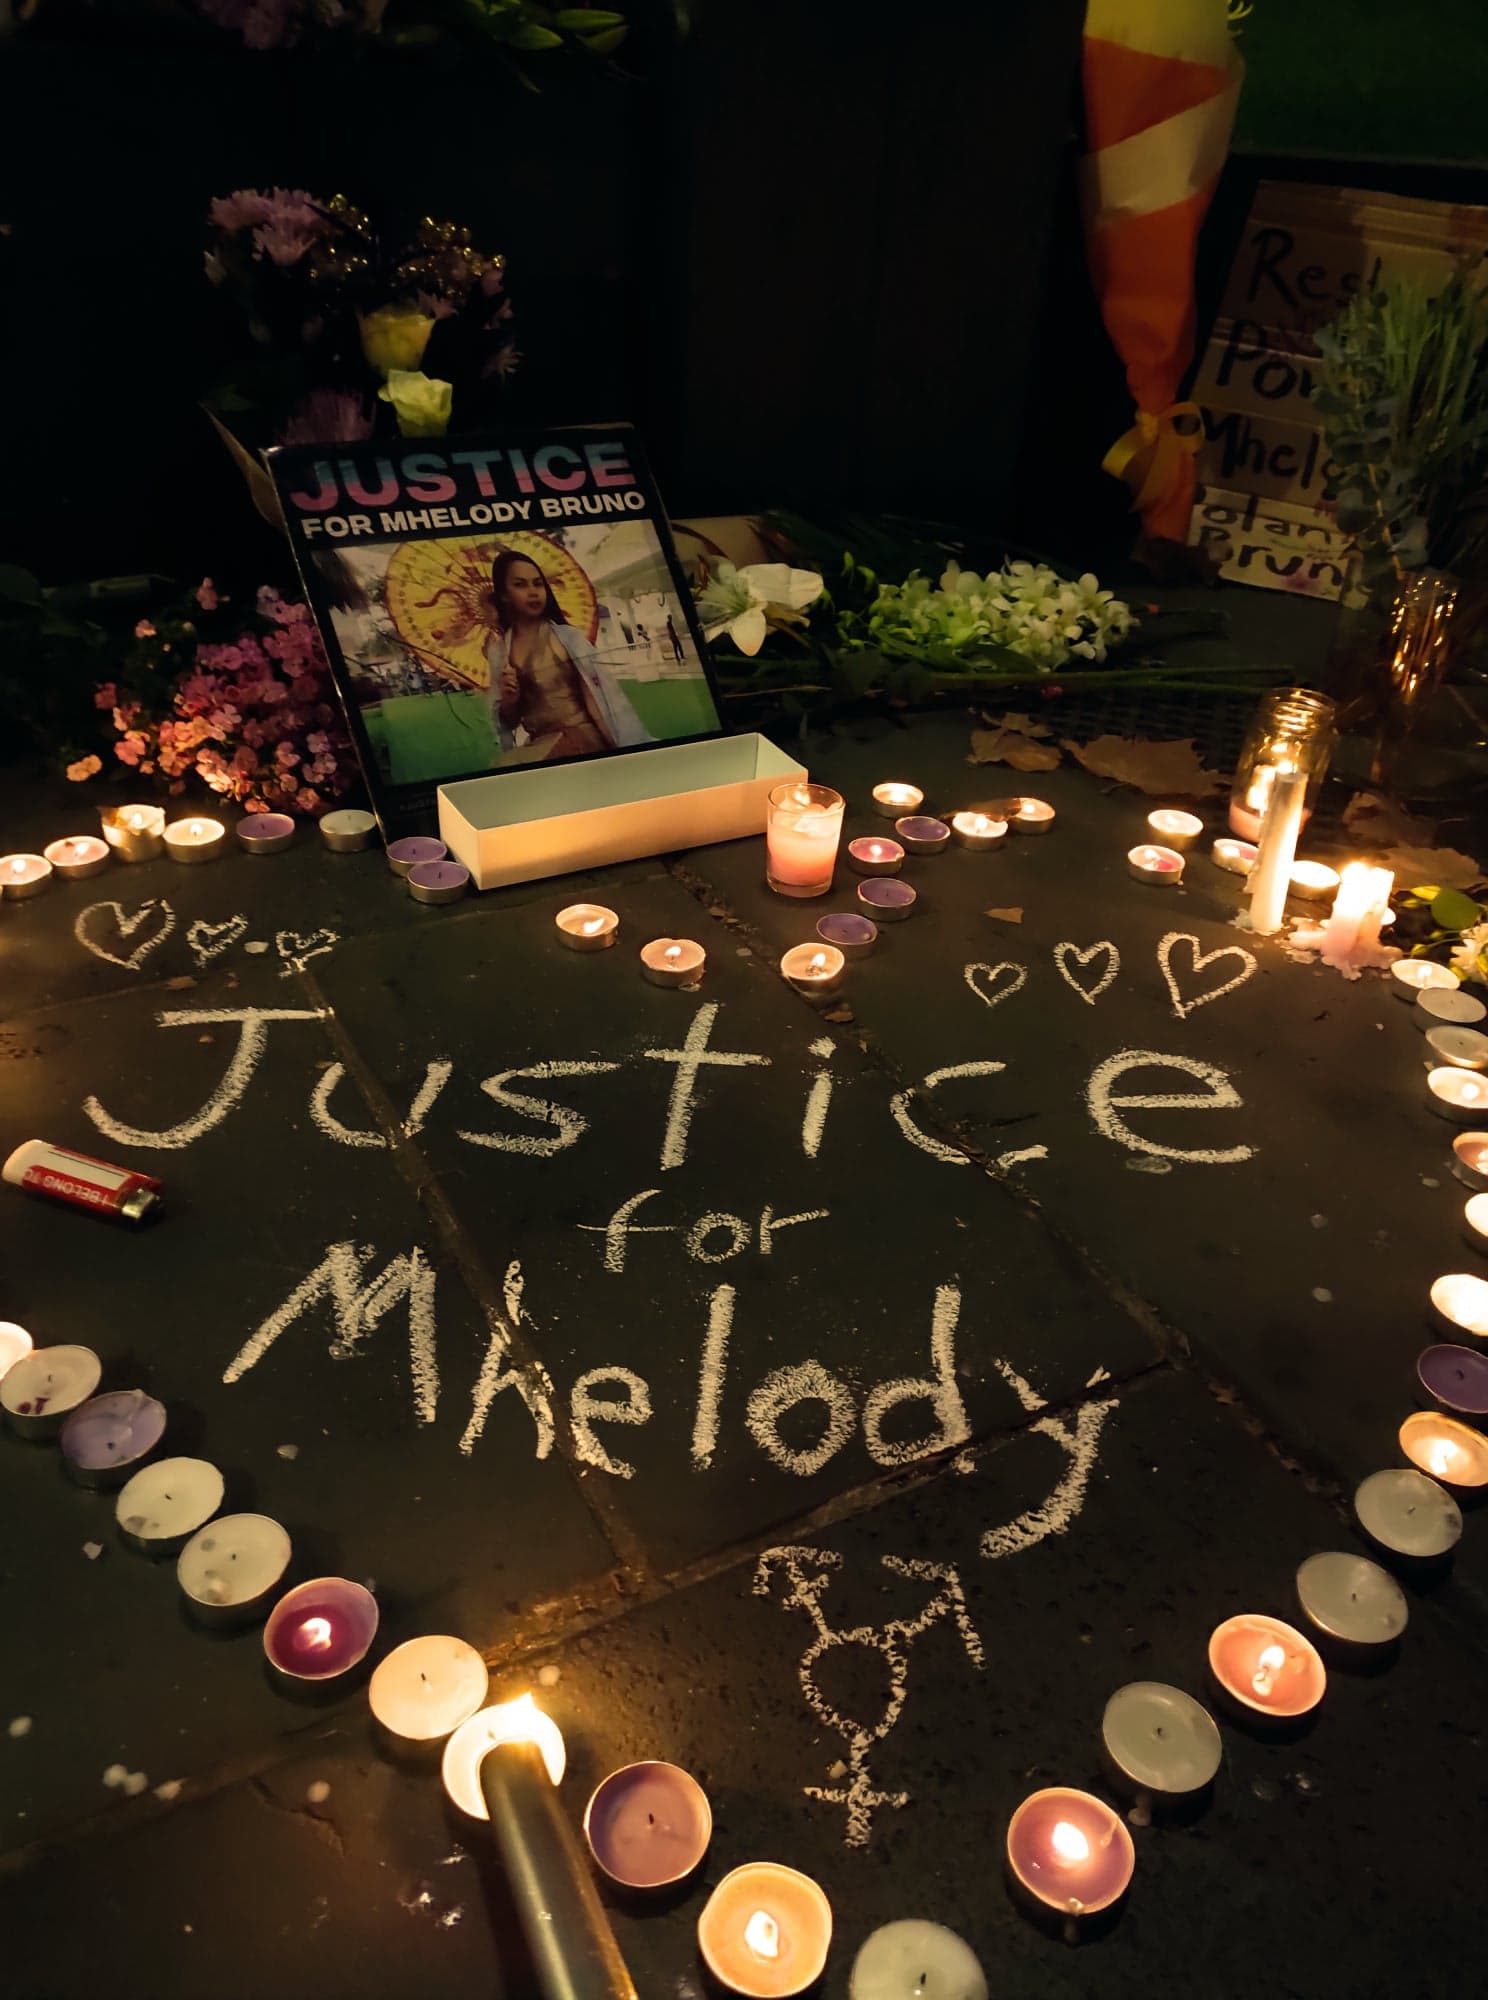 Justice for Mhelody candles and altar